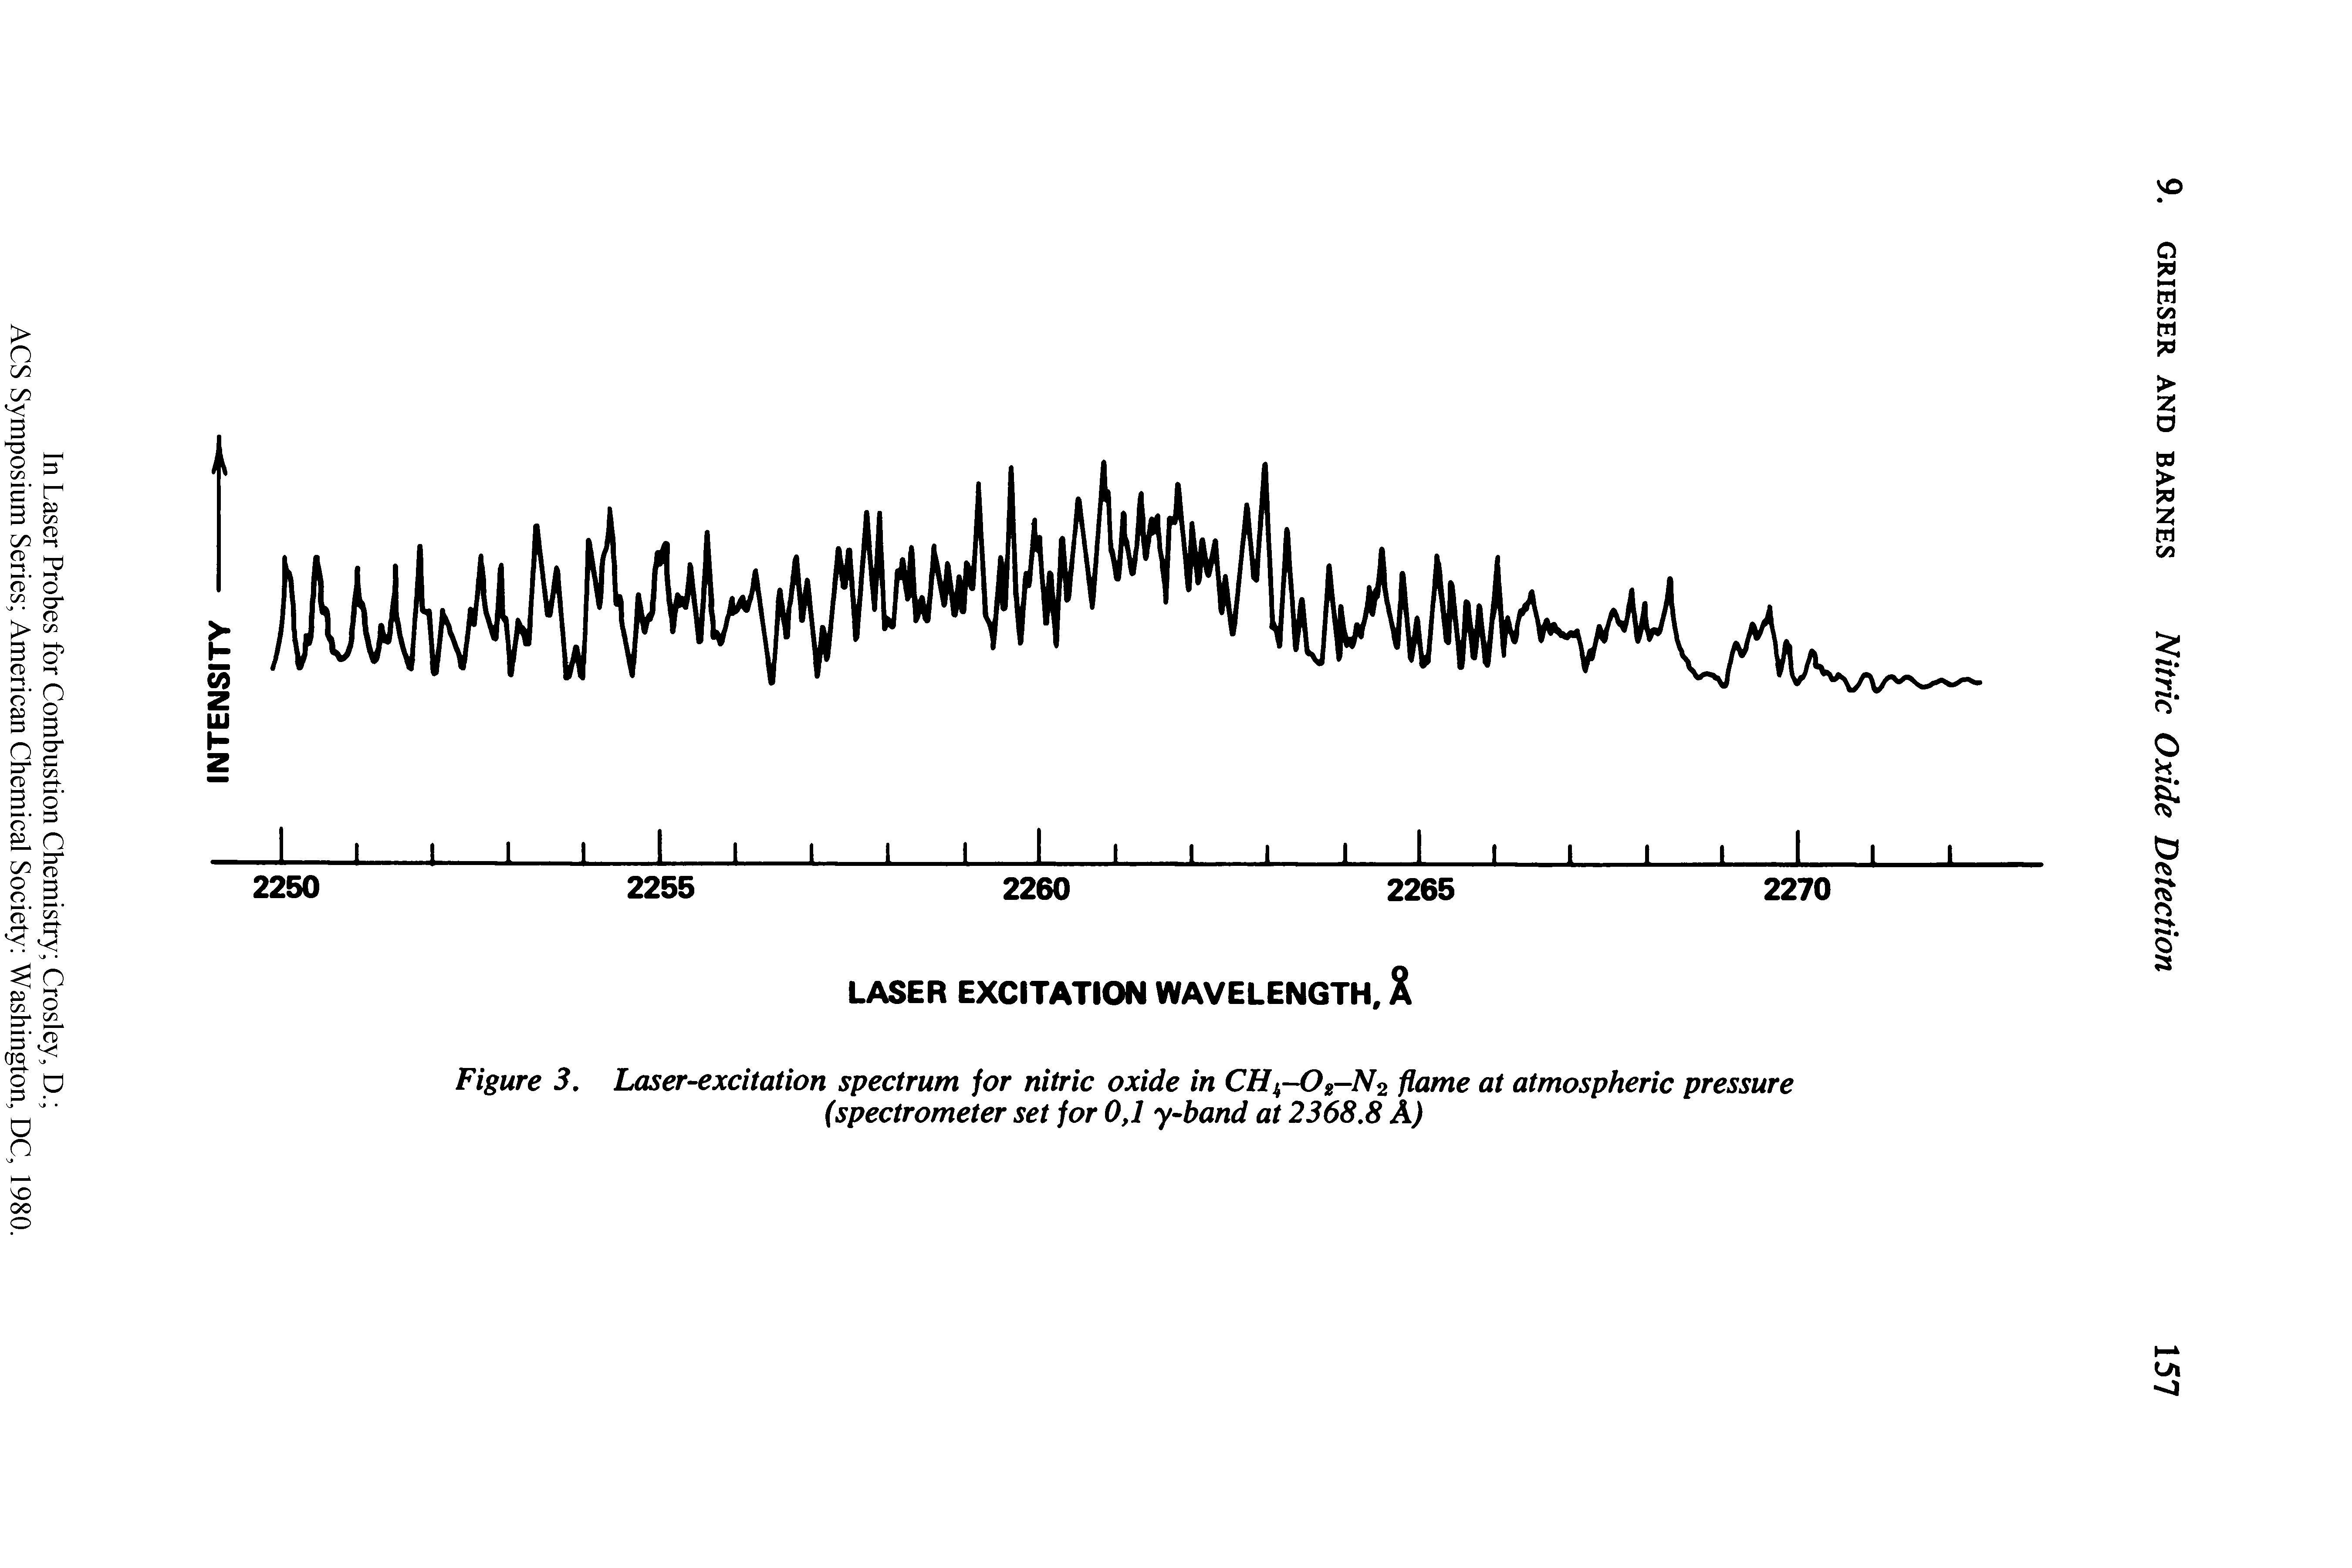 Figure 3. Laser-excitation spectrum for nitric oxide in CHi-02-N2 flame at atmospheric pressure (spectrometer set for 0,1 y-band at 2368.8 A)...